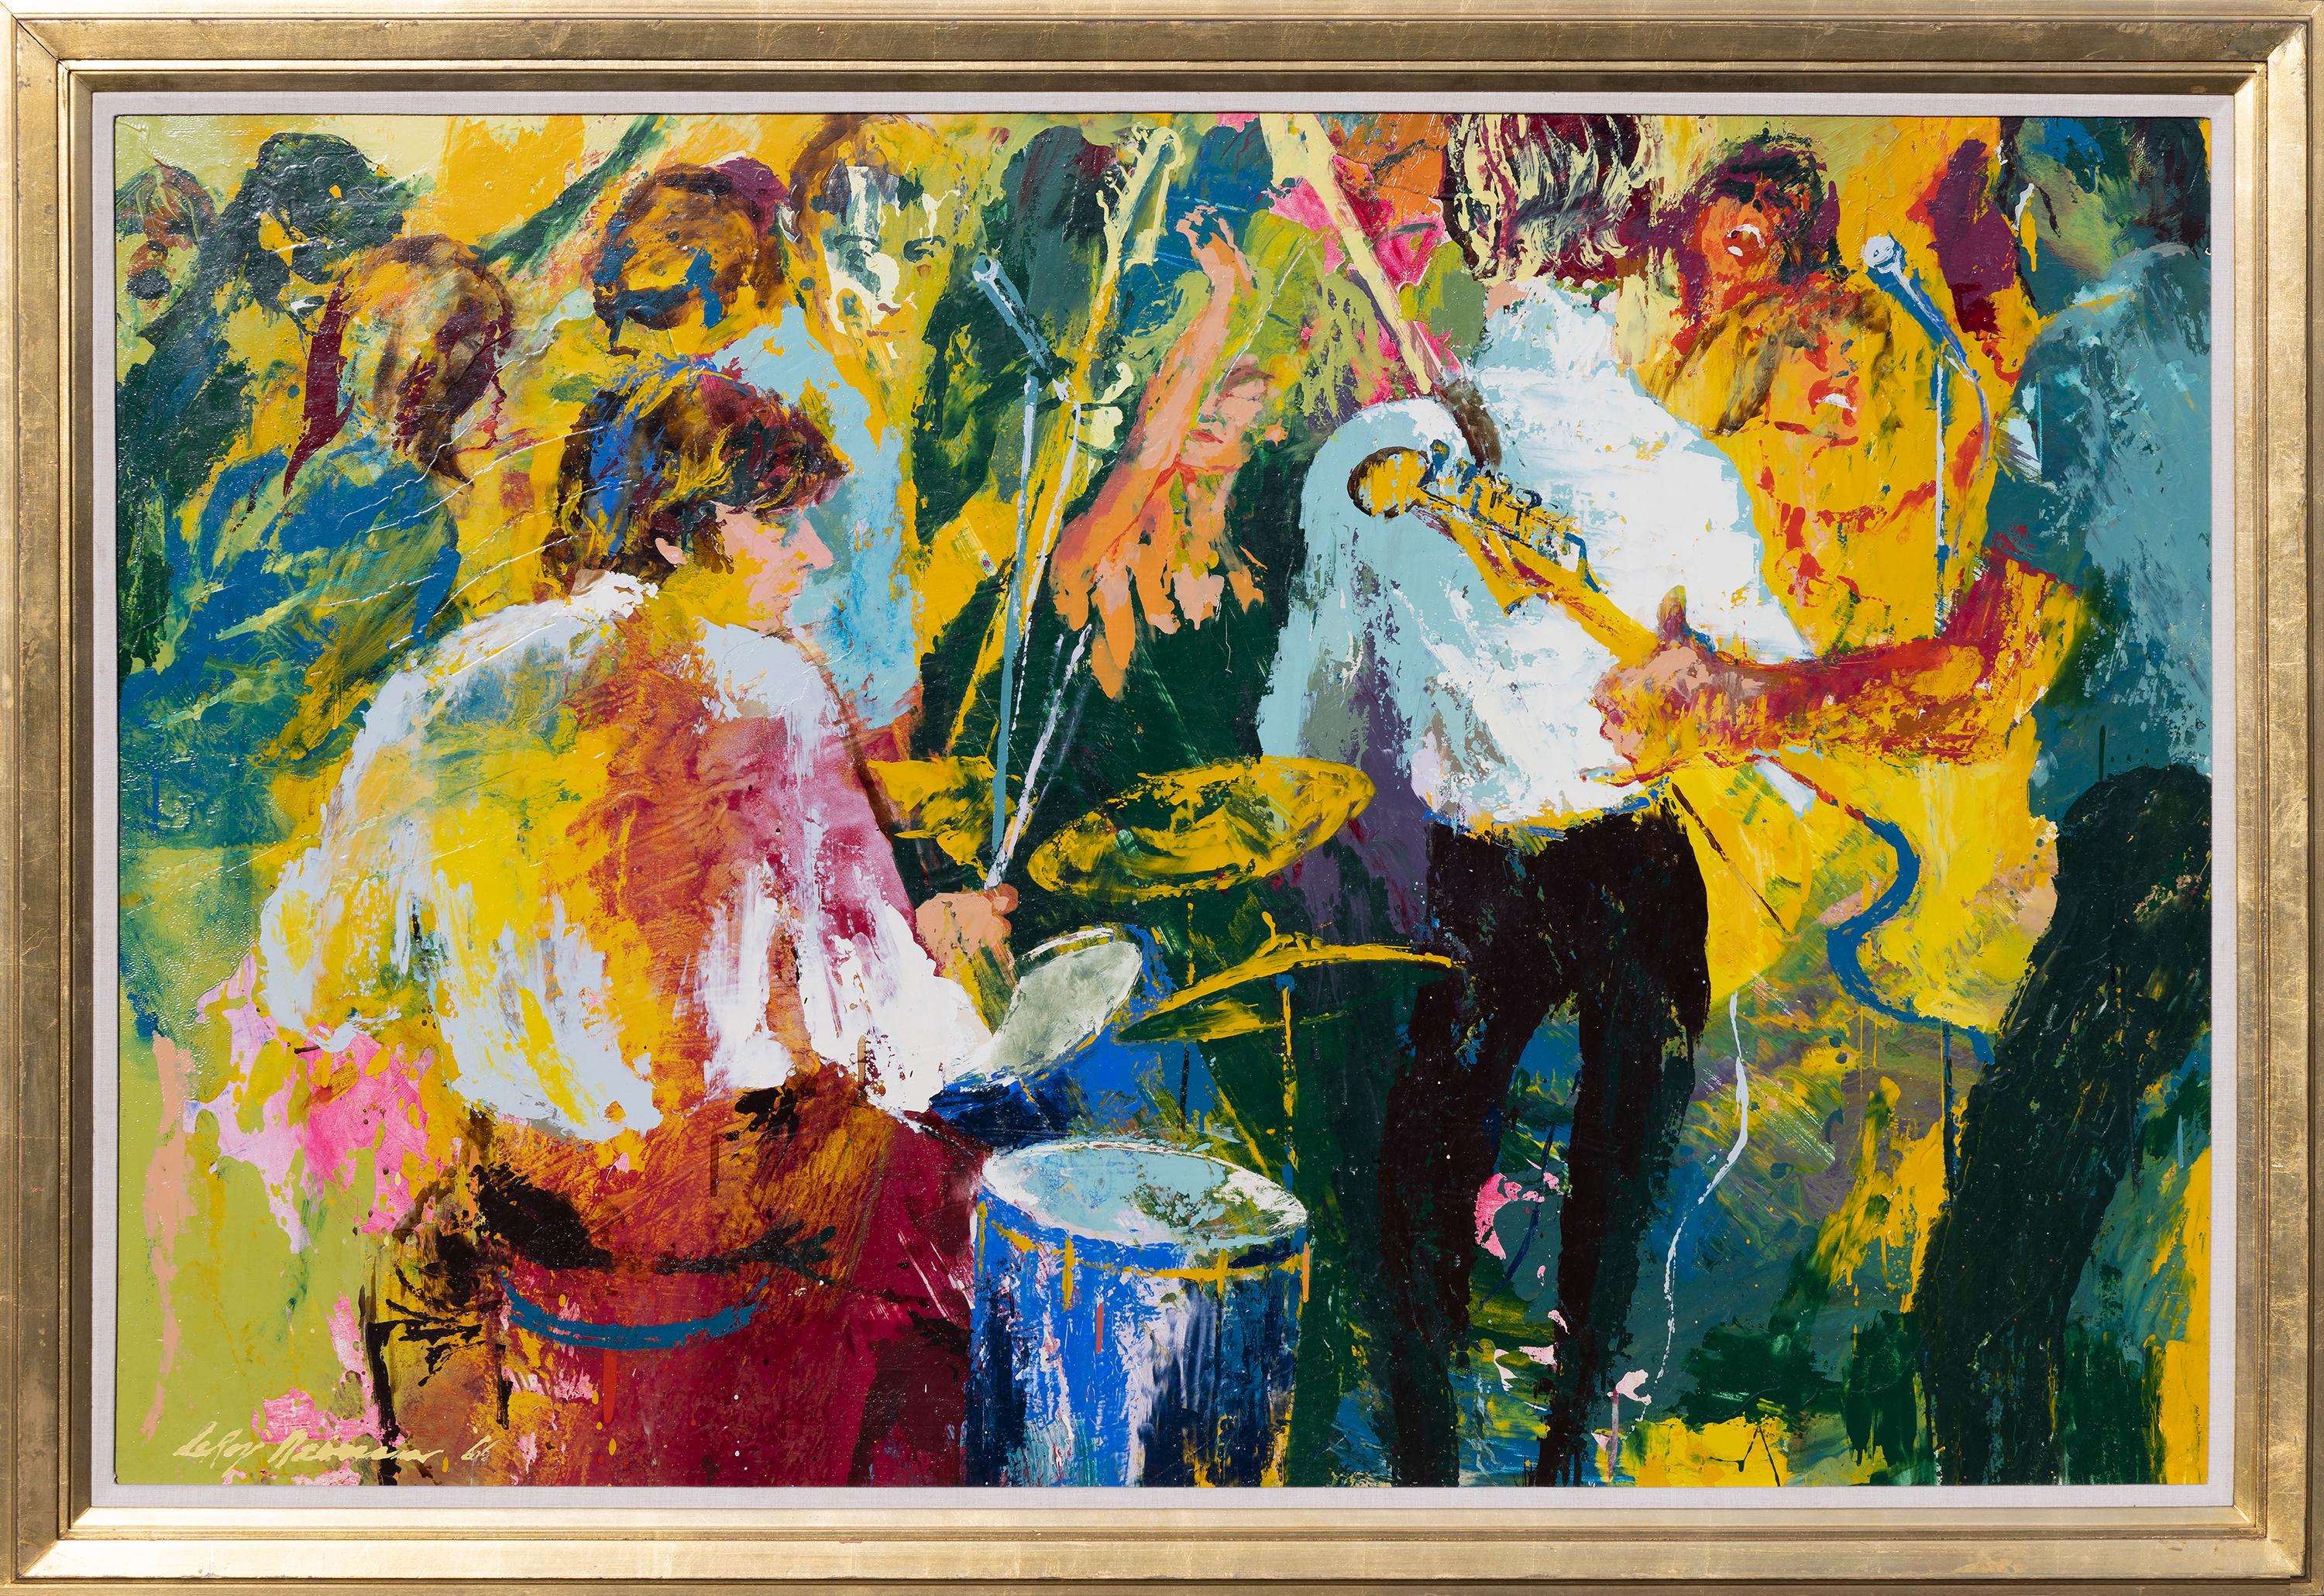 Polanski on the Drums at Dolly’s - Painting by Leroy Neiman